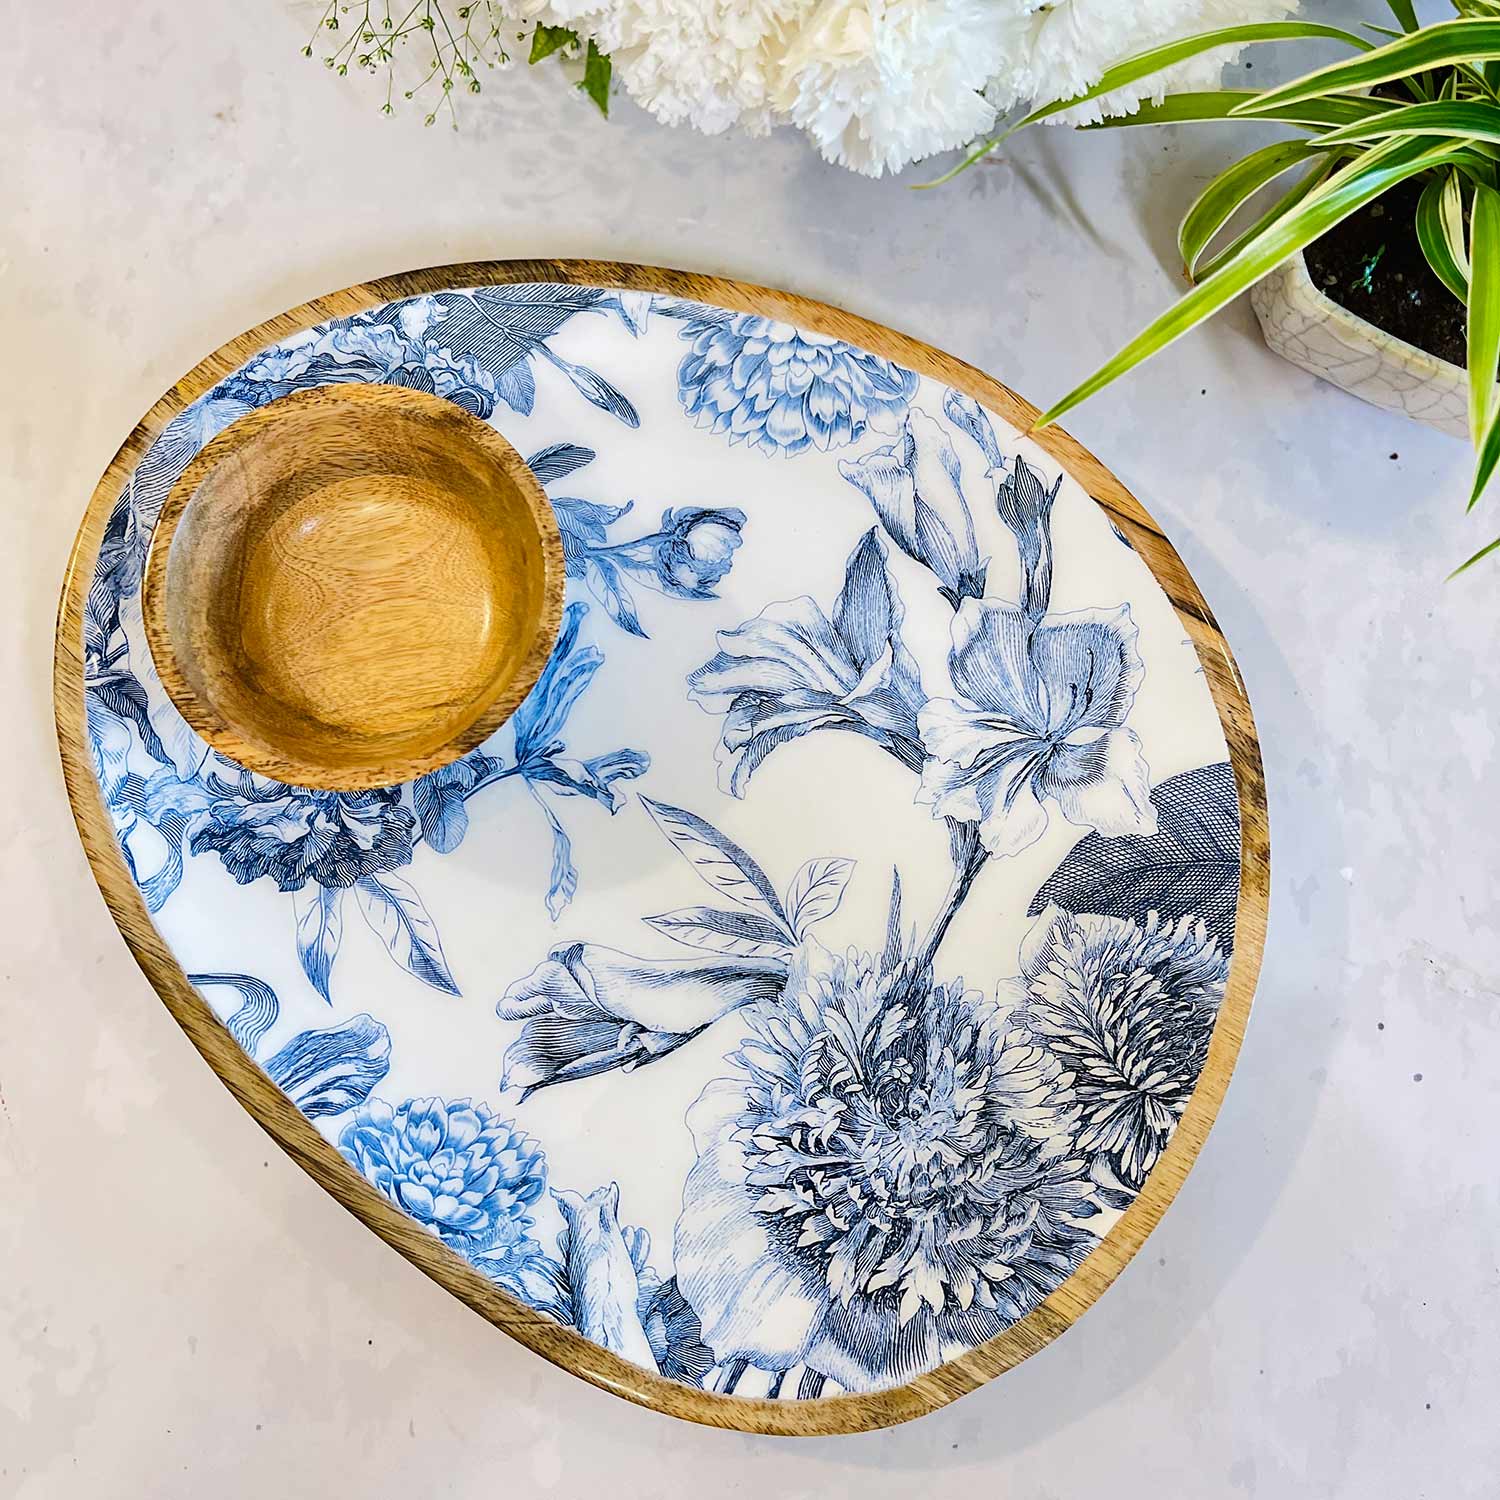 Large Oval Platter with Dip Bowl - Brittany Blanc